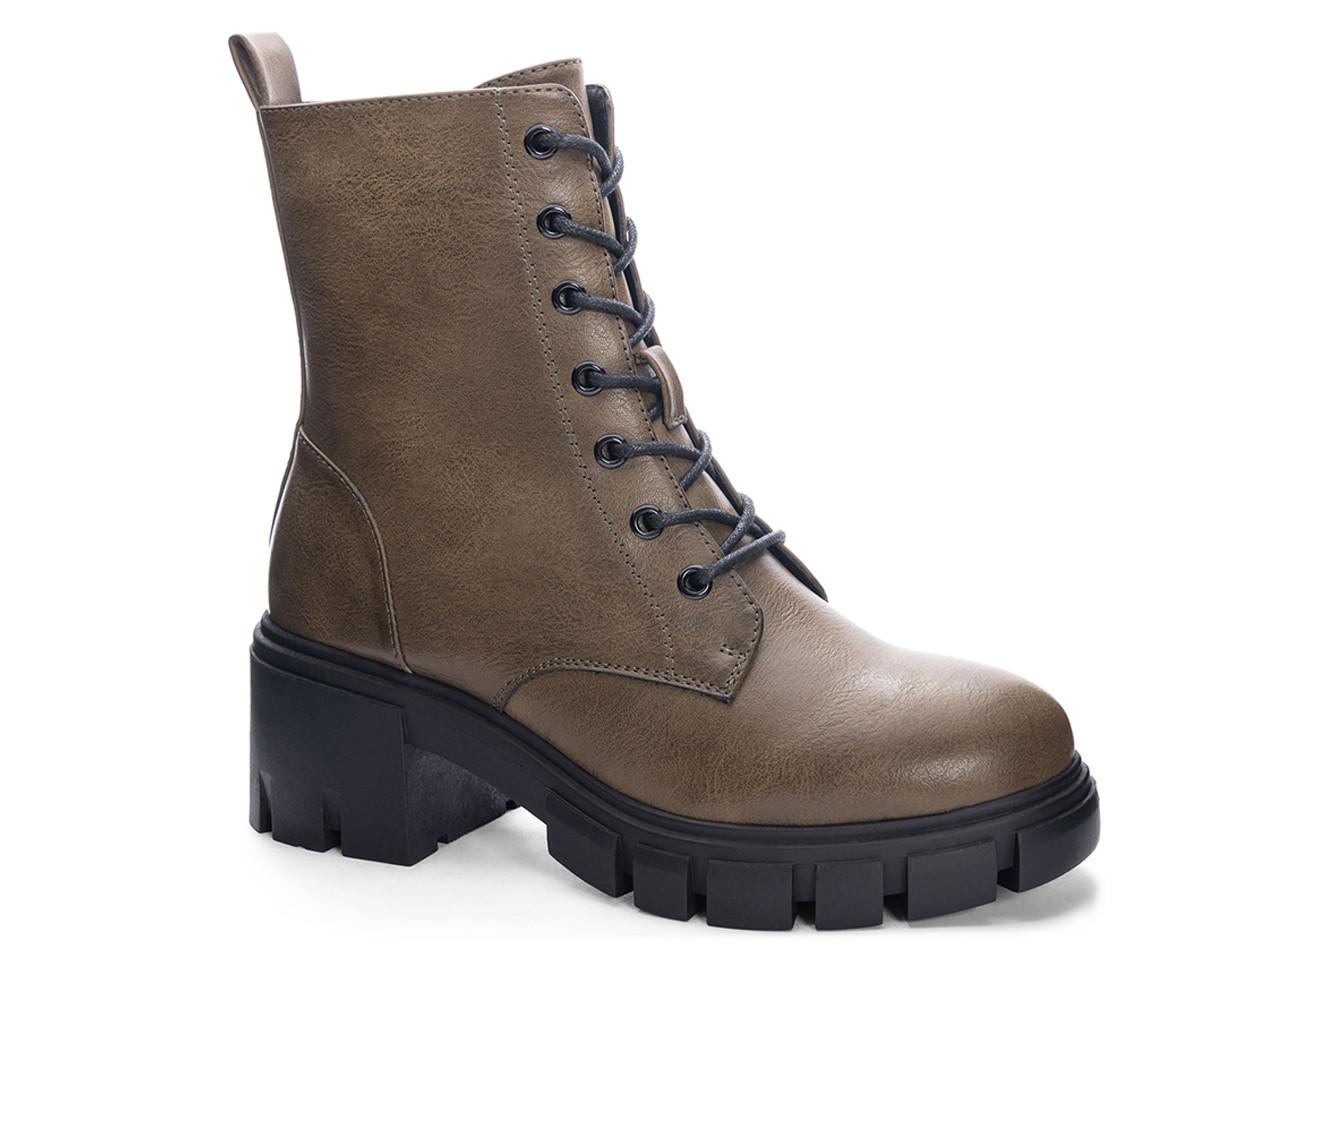 Women's Dirty Laundry Newz Lace Up Booties